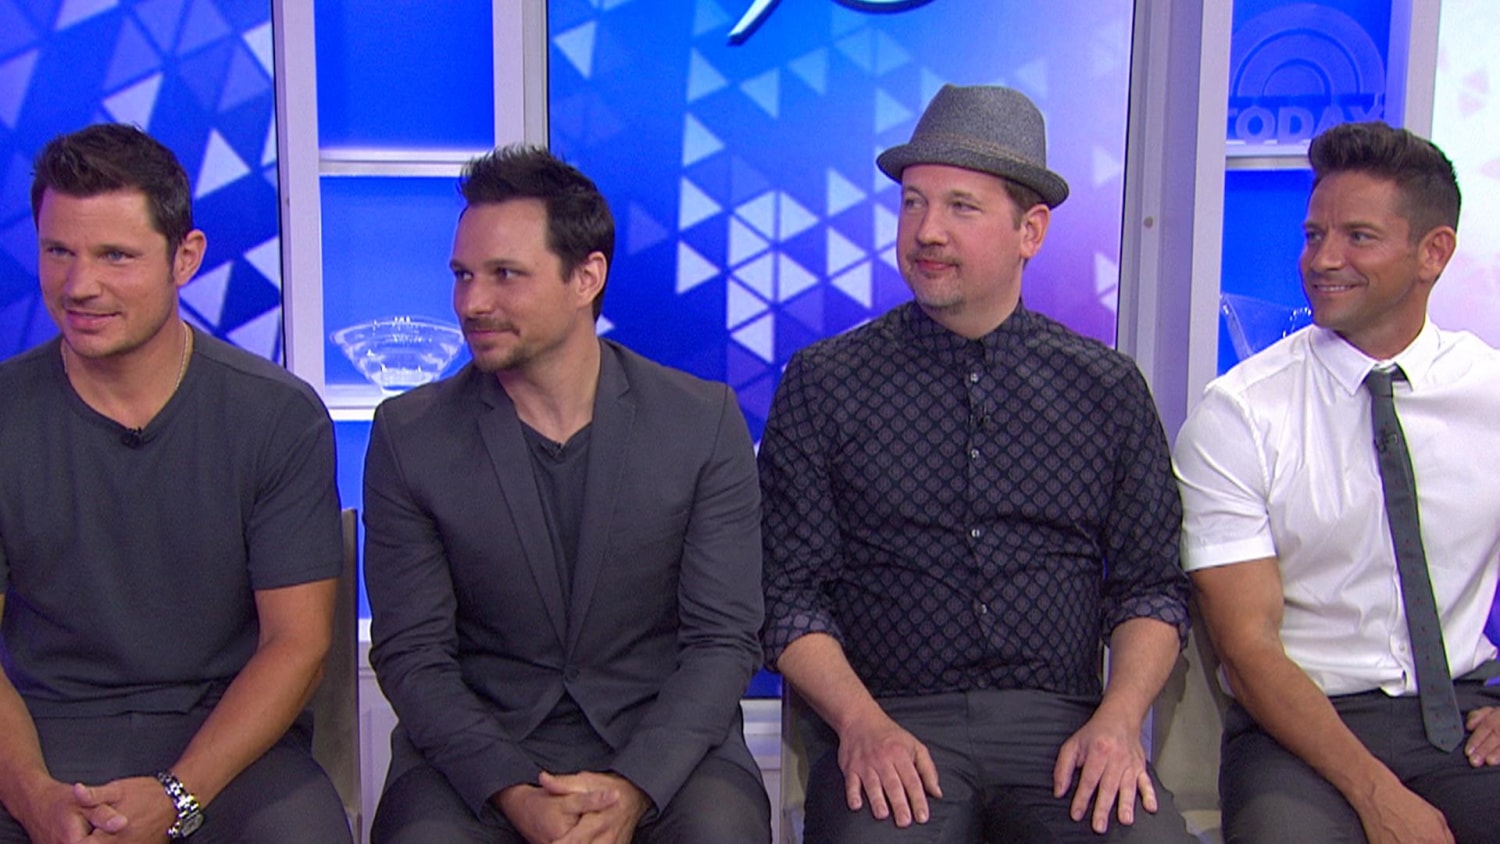 Nick Lachey: 98 Degrees are ready to reconnect with fans on tour